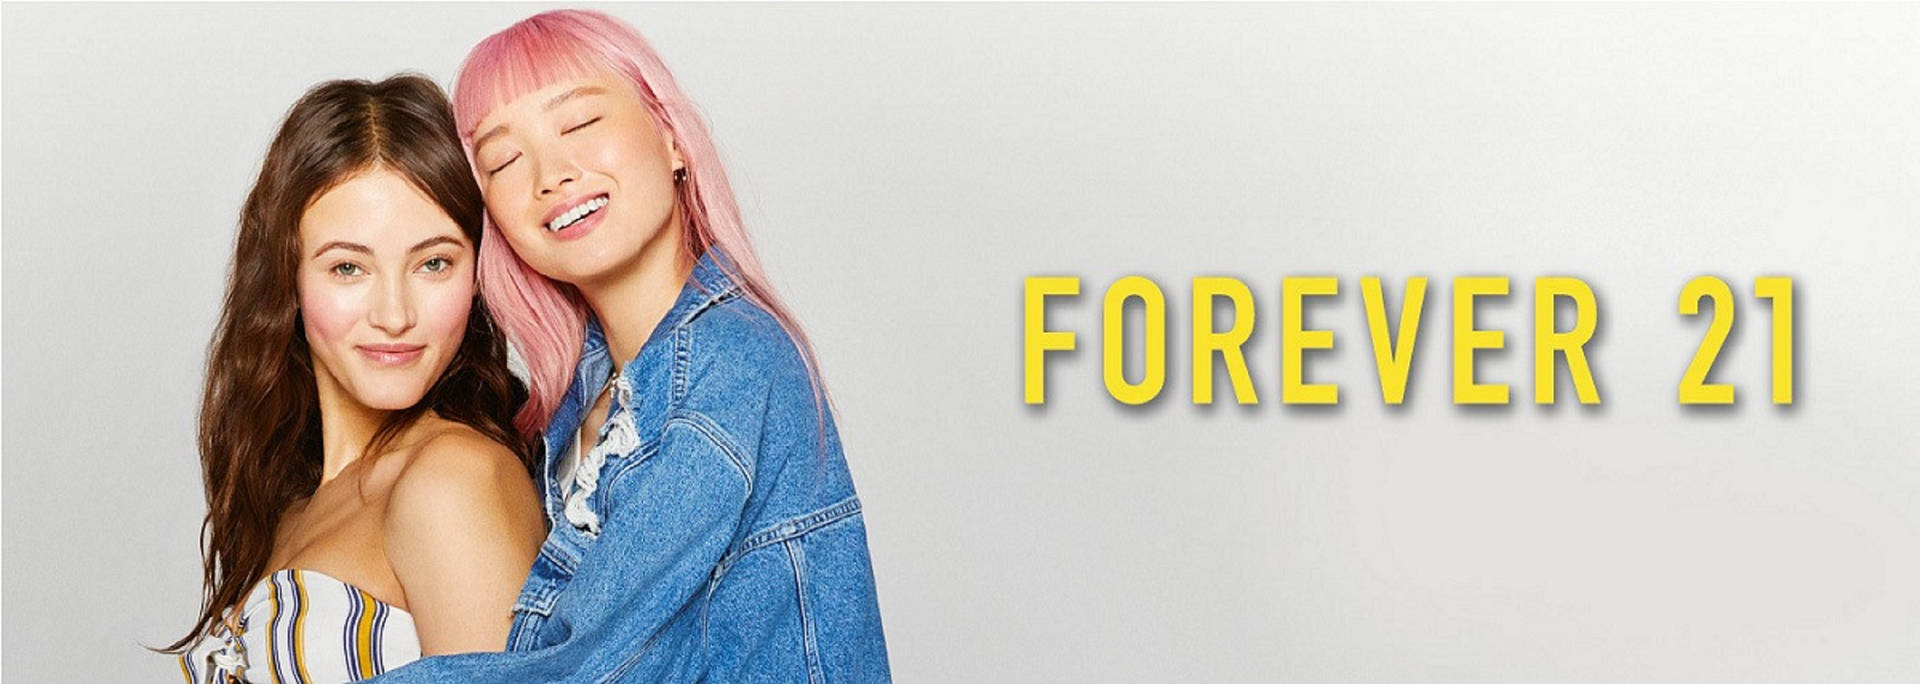 Widescreen Forever 21 Fashion Poster Background